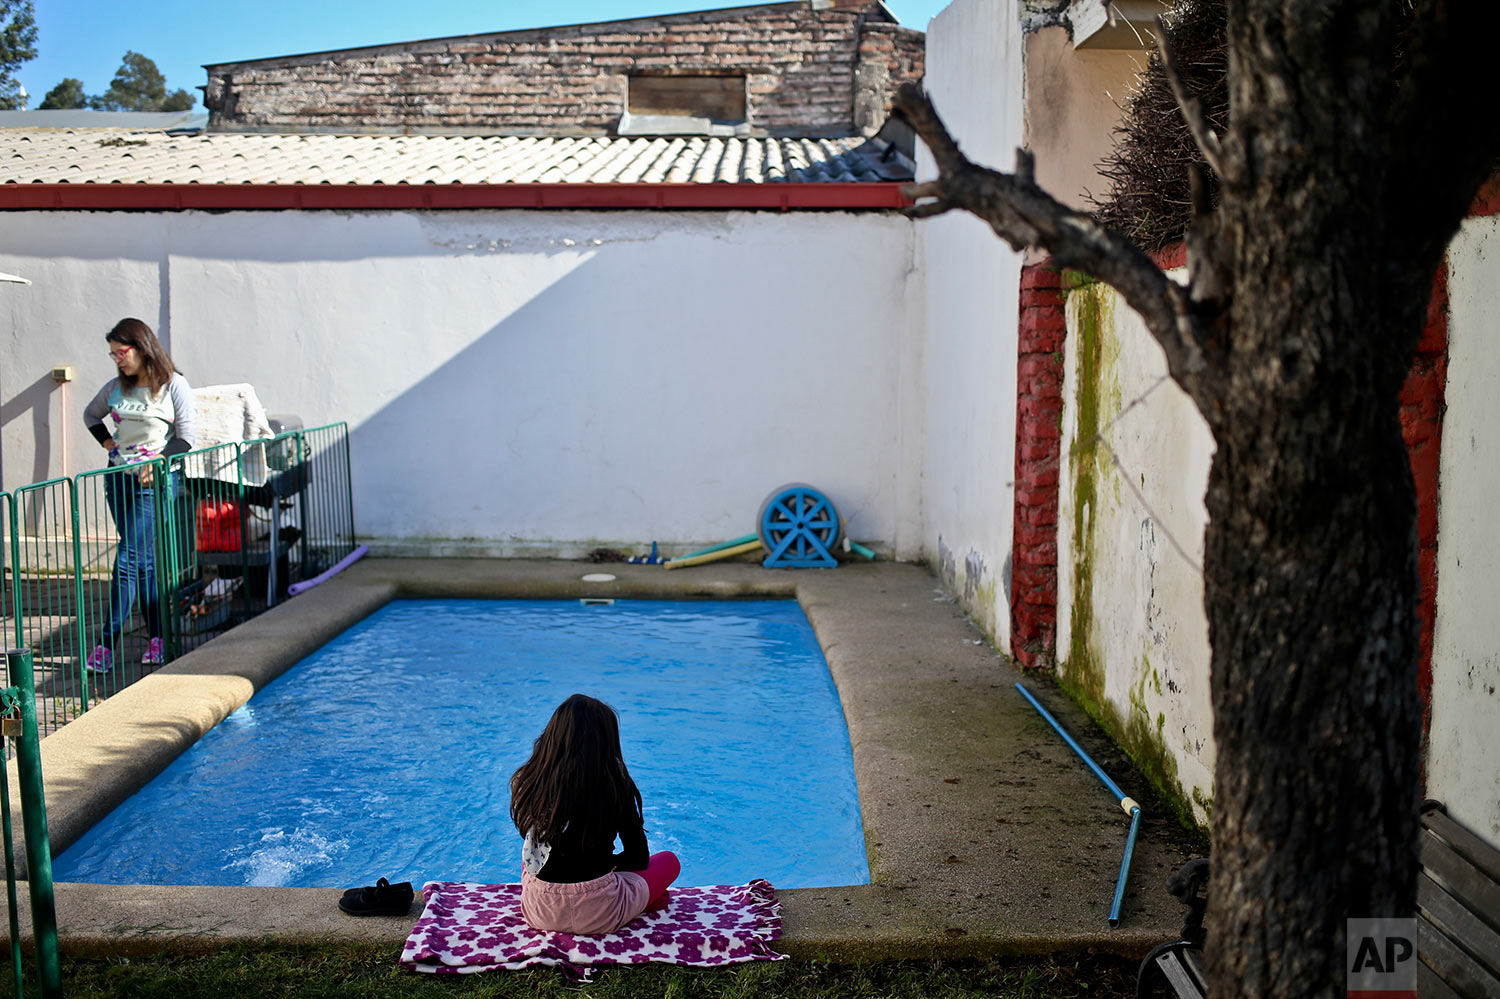  In this July 18, 2017 photo, transgender girl Luna sits beside the pool at her home in Santiago, Chile. An uncomfortable incident two years ago about Luna's gender led her parents to file a lawsuit demanding her name and gender be legally changed fr